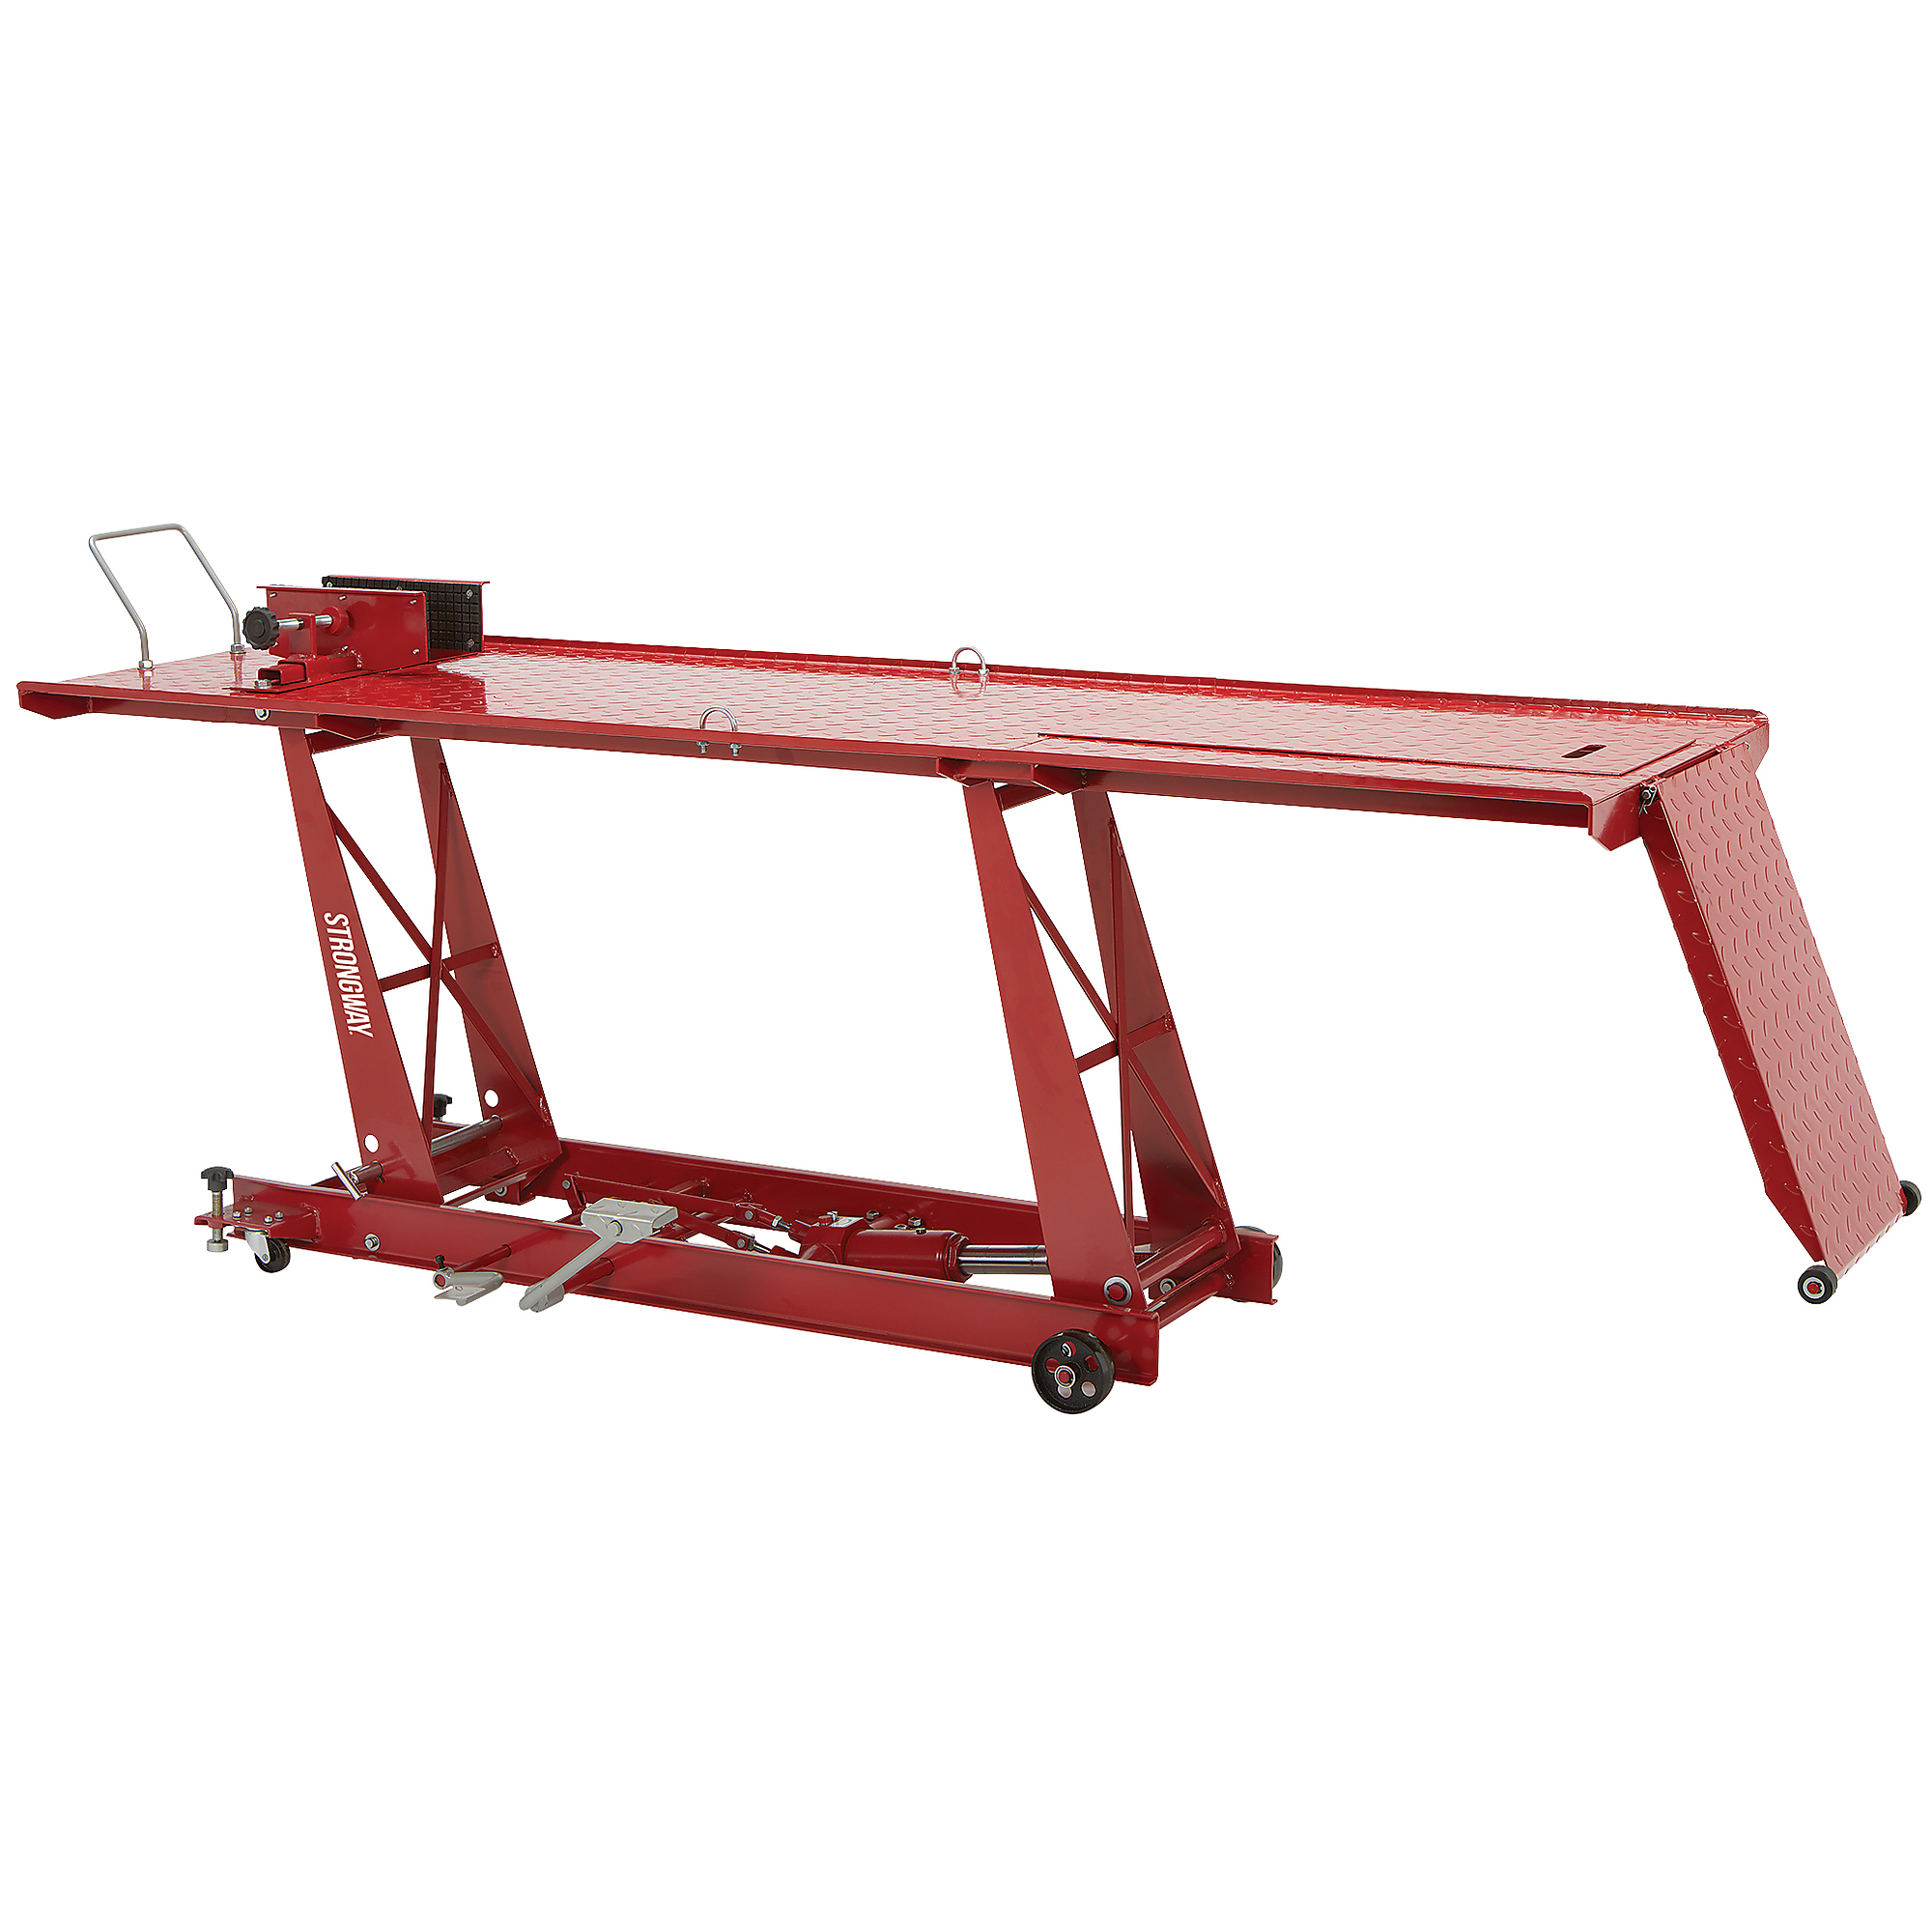 Strongway Steel Hydraulic Motorcycle Lift, 1000-Lb. Capacity, Model ZD04101D-500